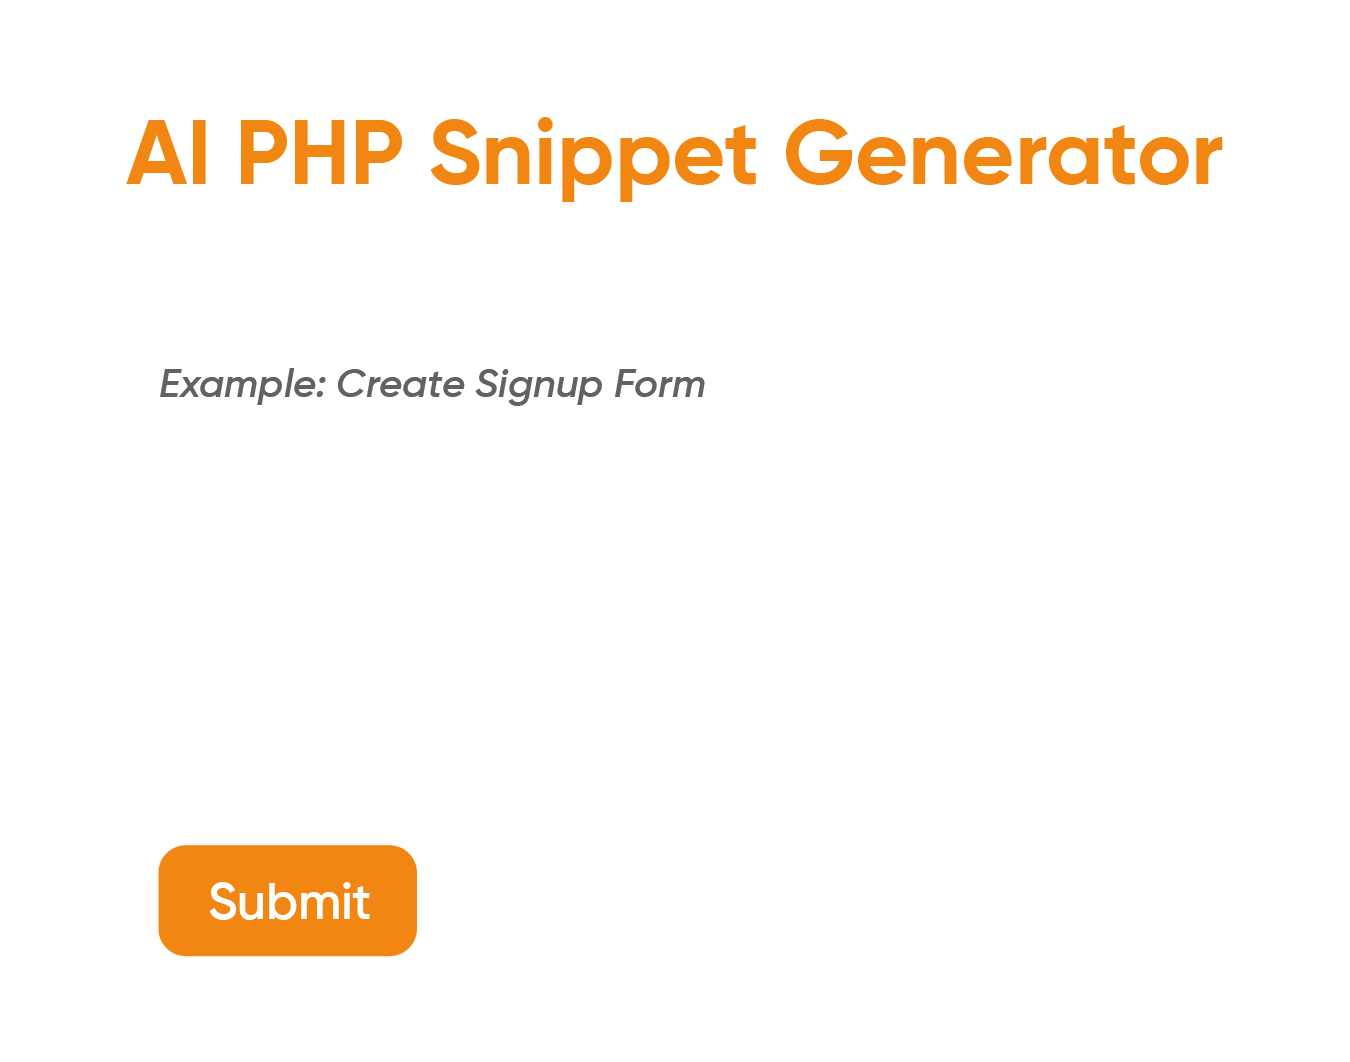 Ettvi's AI PHP Snippet tool